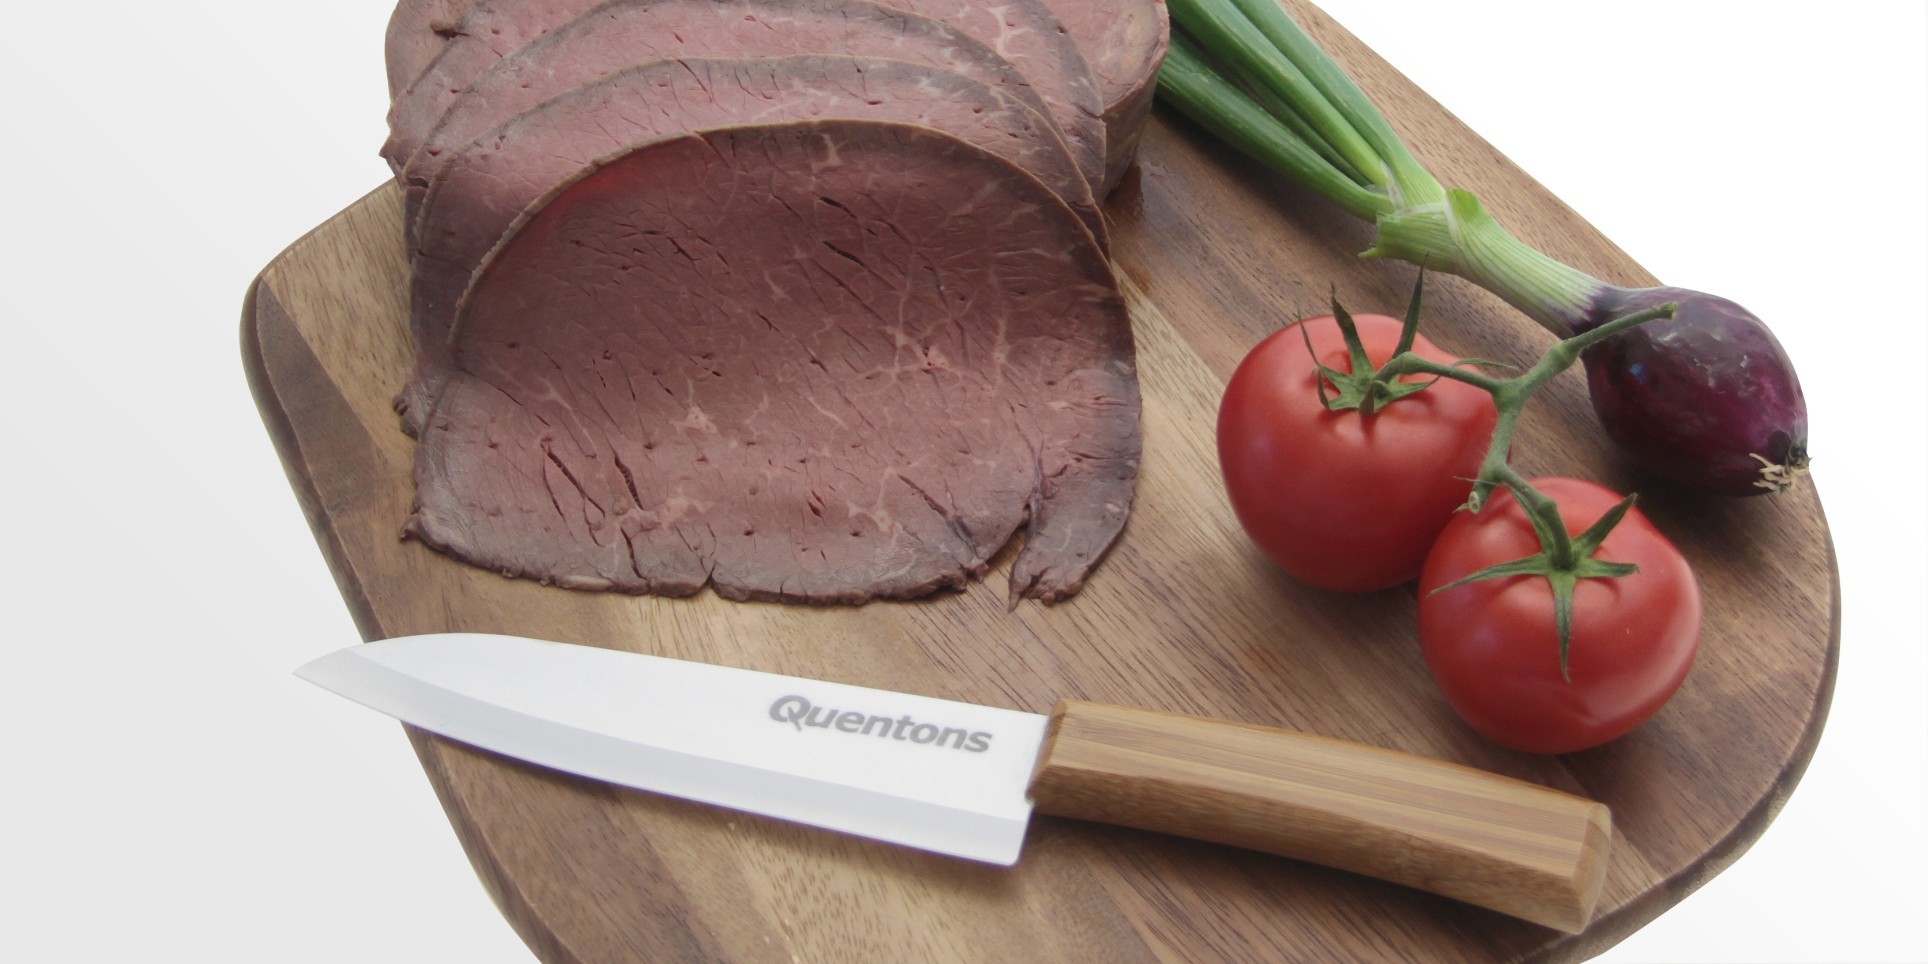 Quentons Ceramic Chef knife